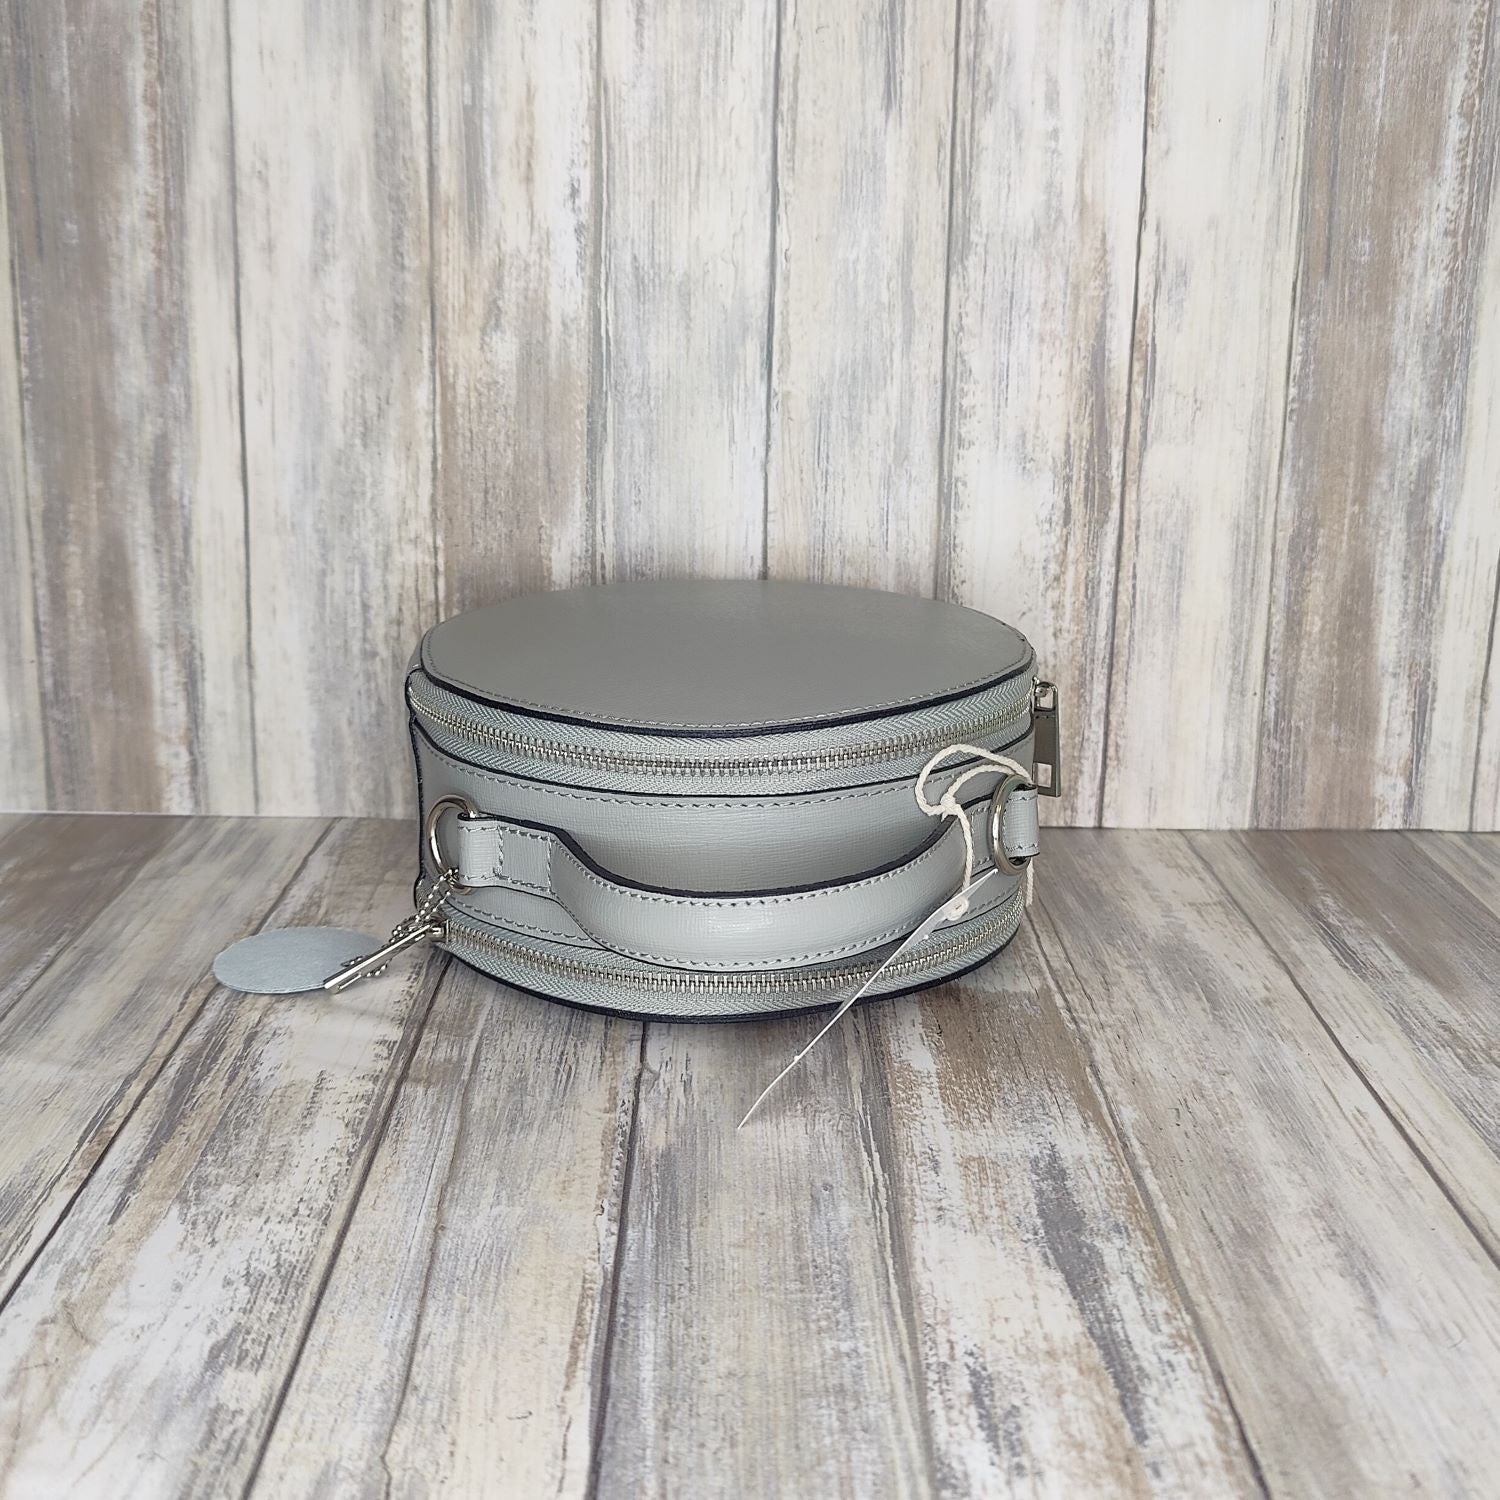 This stylish Italian leather round grab bag is an essential addition to any wardrobe. With a two-zip closure and unique shape, it is a versatile accessory for any occasion. The bag also features a convenient grab handle as well as a detachable long crossbody strap.   Maximum handle drop 60cm   Silver hardware   h:19cm x w19cm x d8cm 